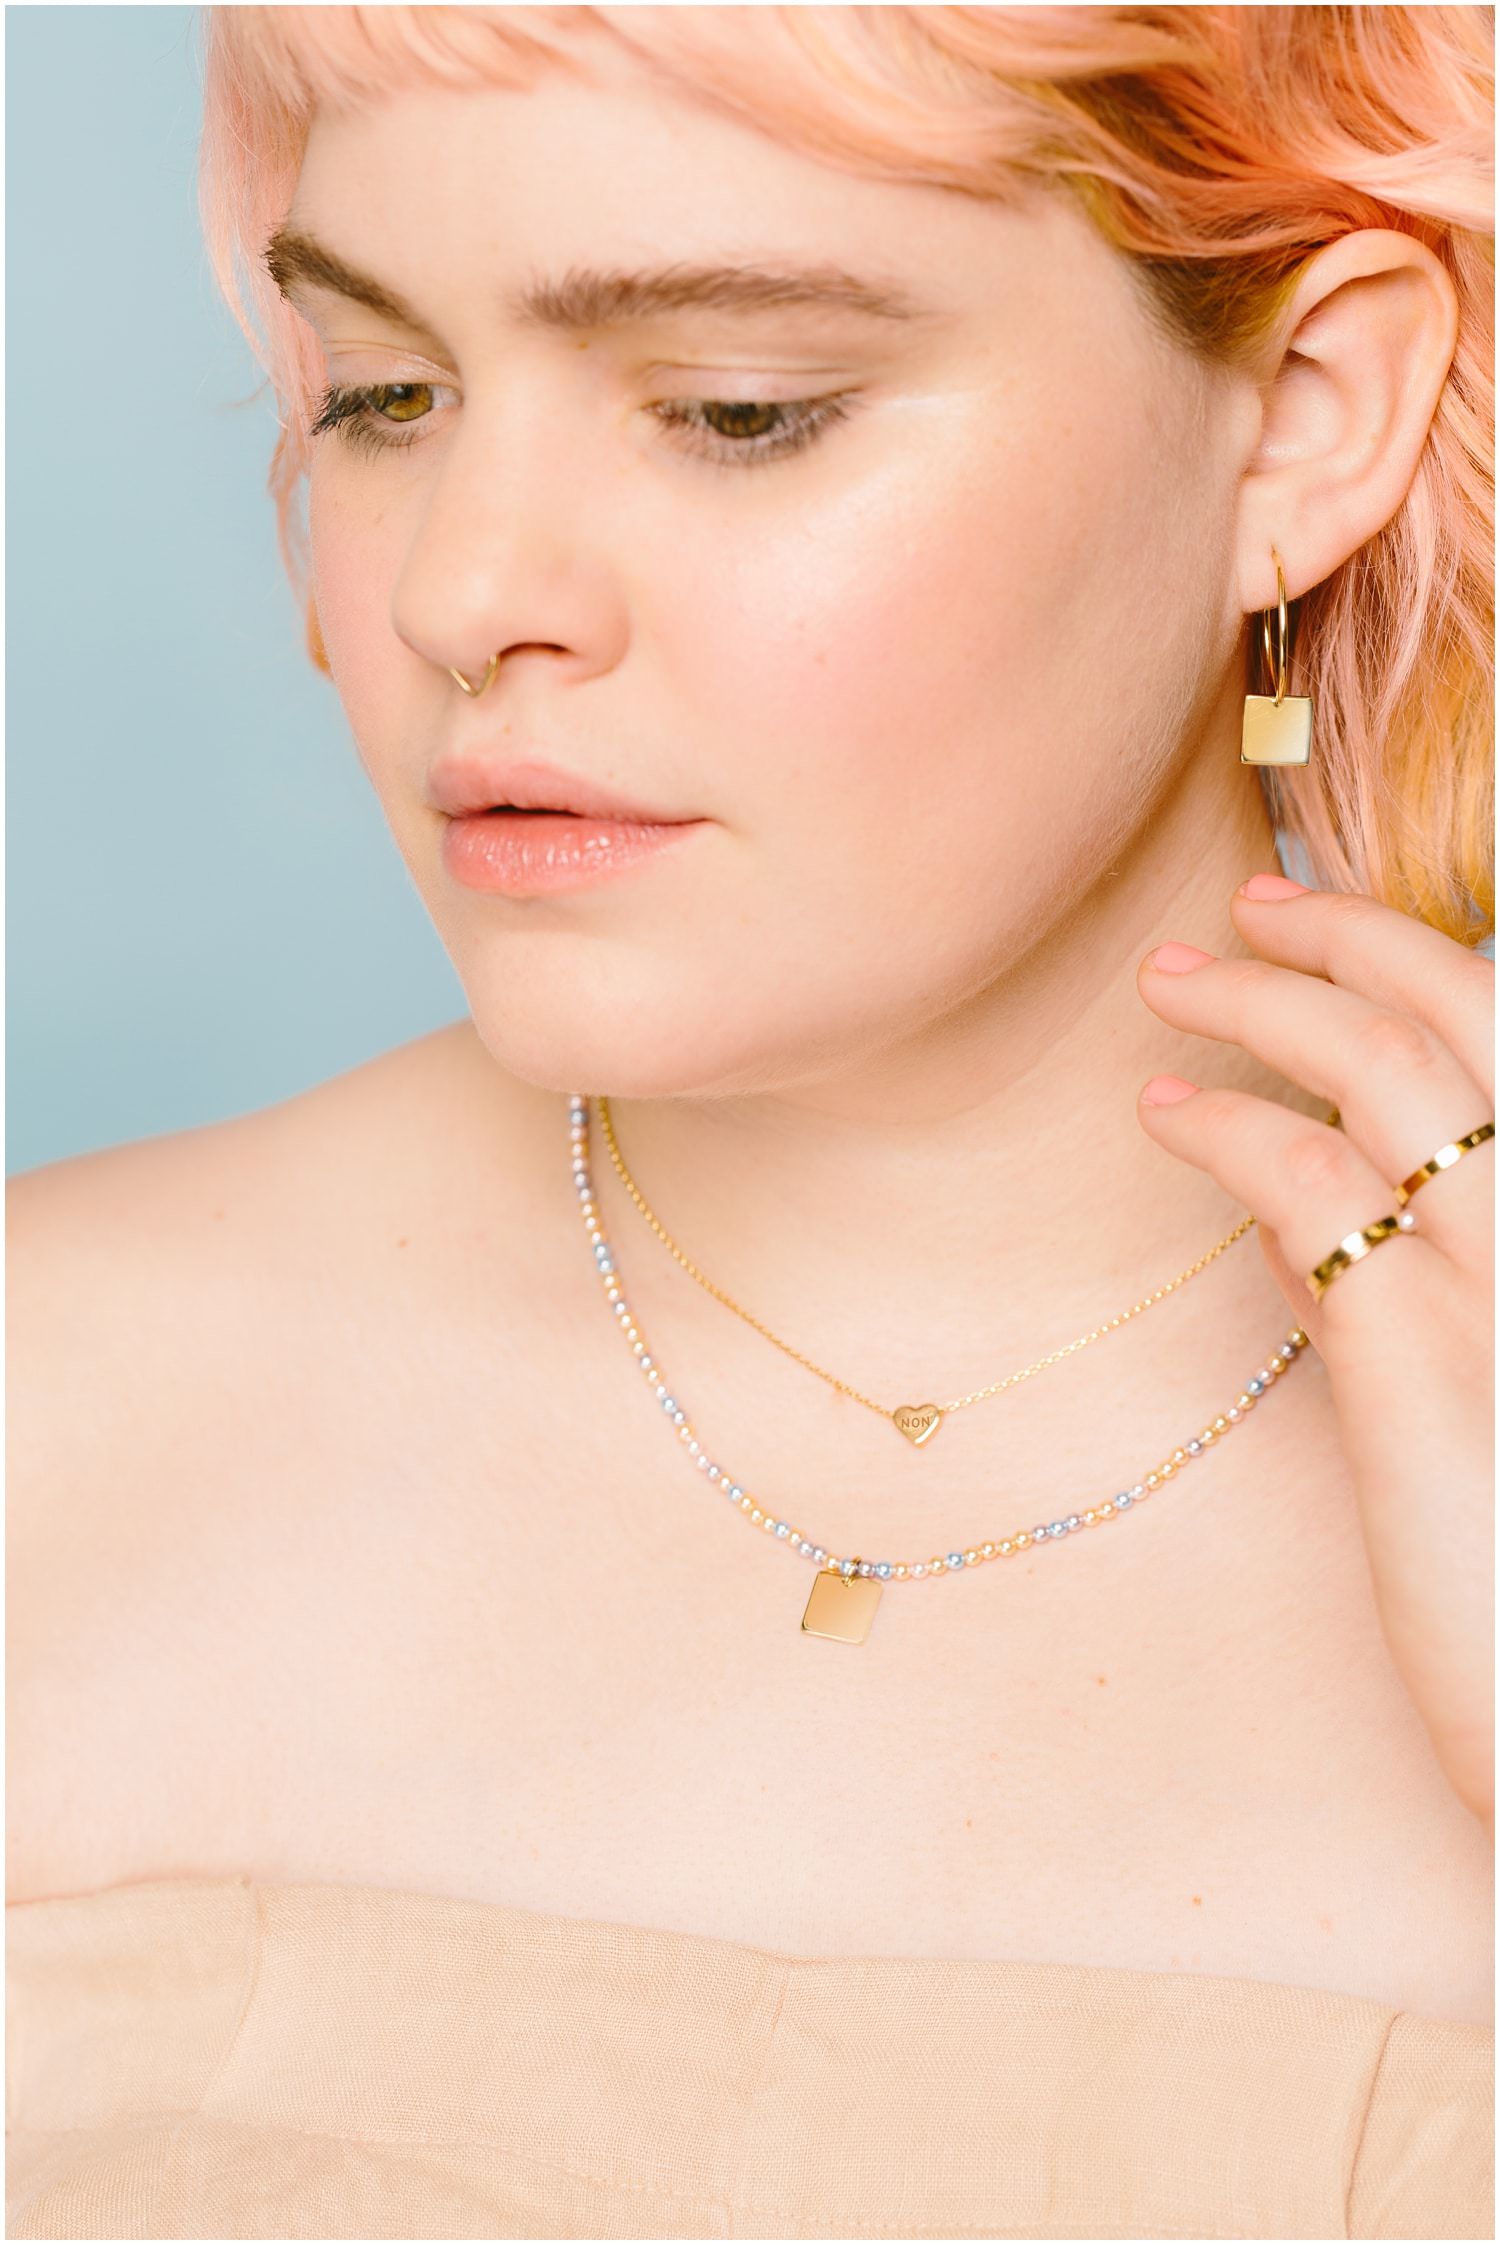 adam lowe photography , fashion, editorial, commercial, style, one six five jewerly, model, small talk, columbus, ohio, 